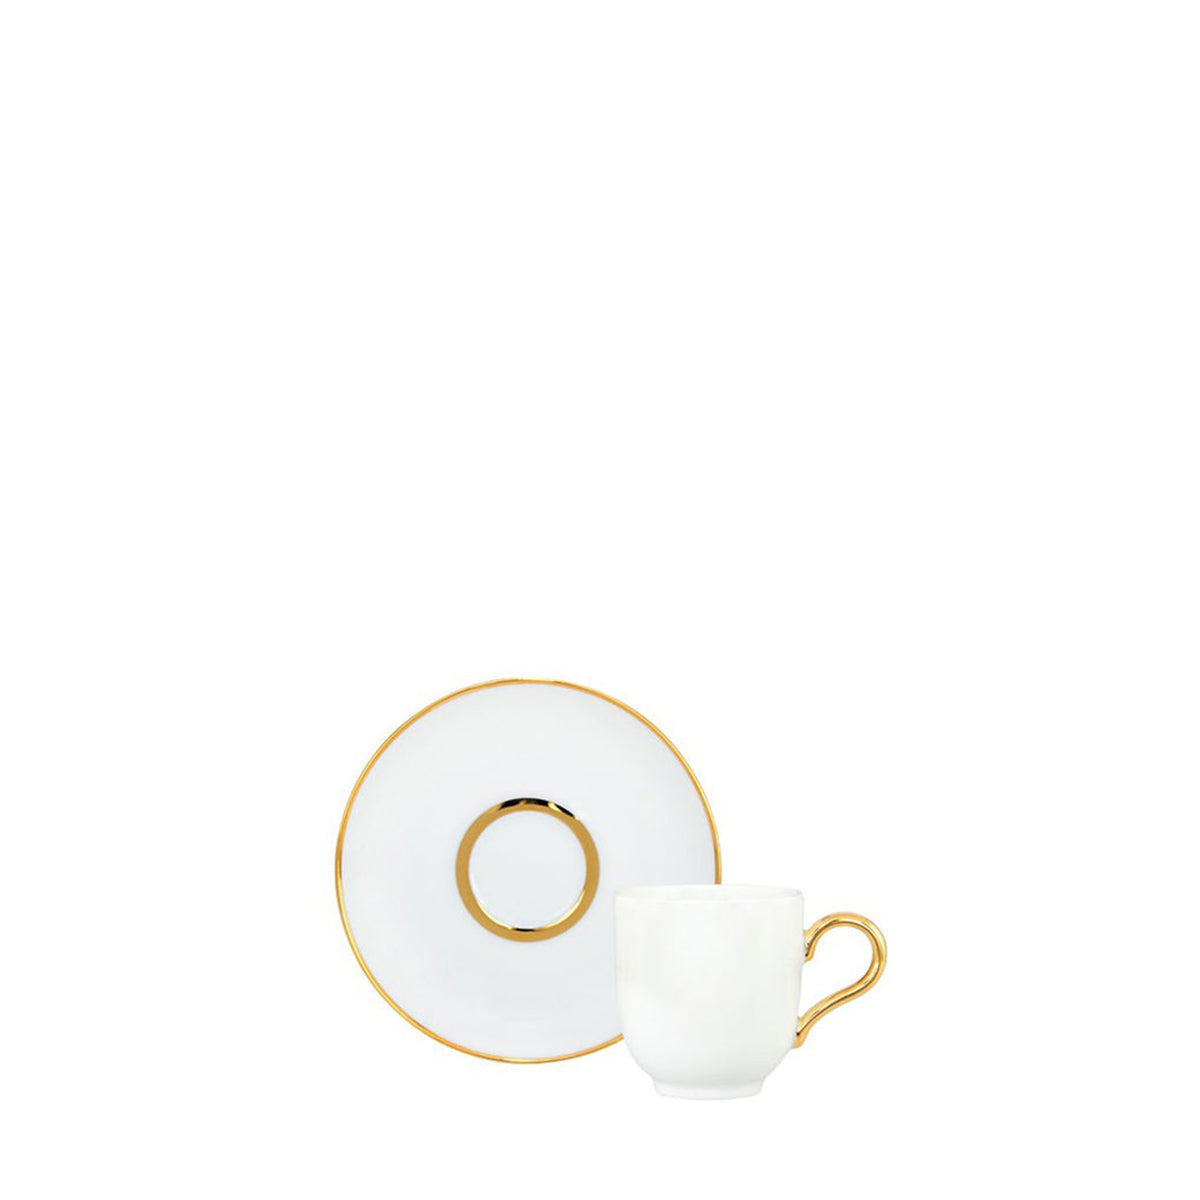 PREMIUM GOLD COFFEE CUP AND SAUCER 11CL